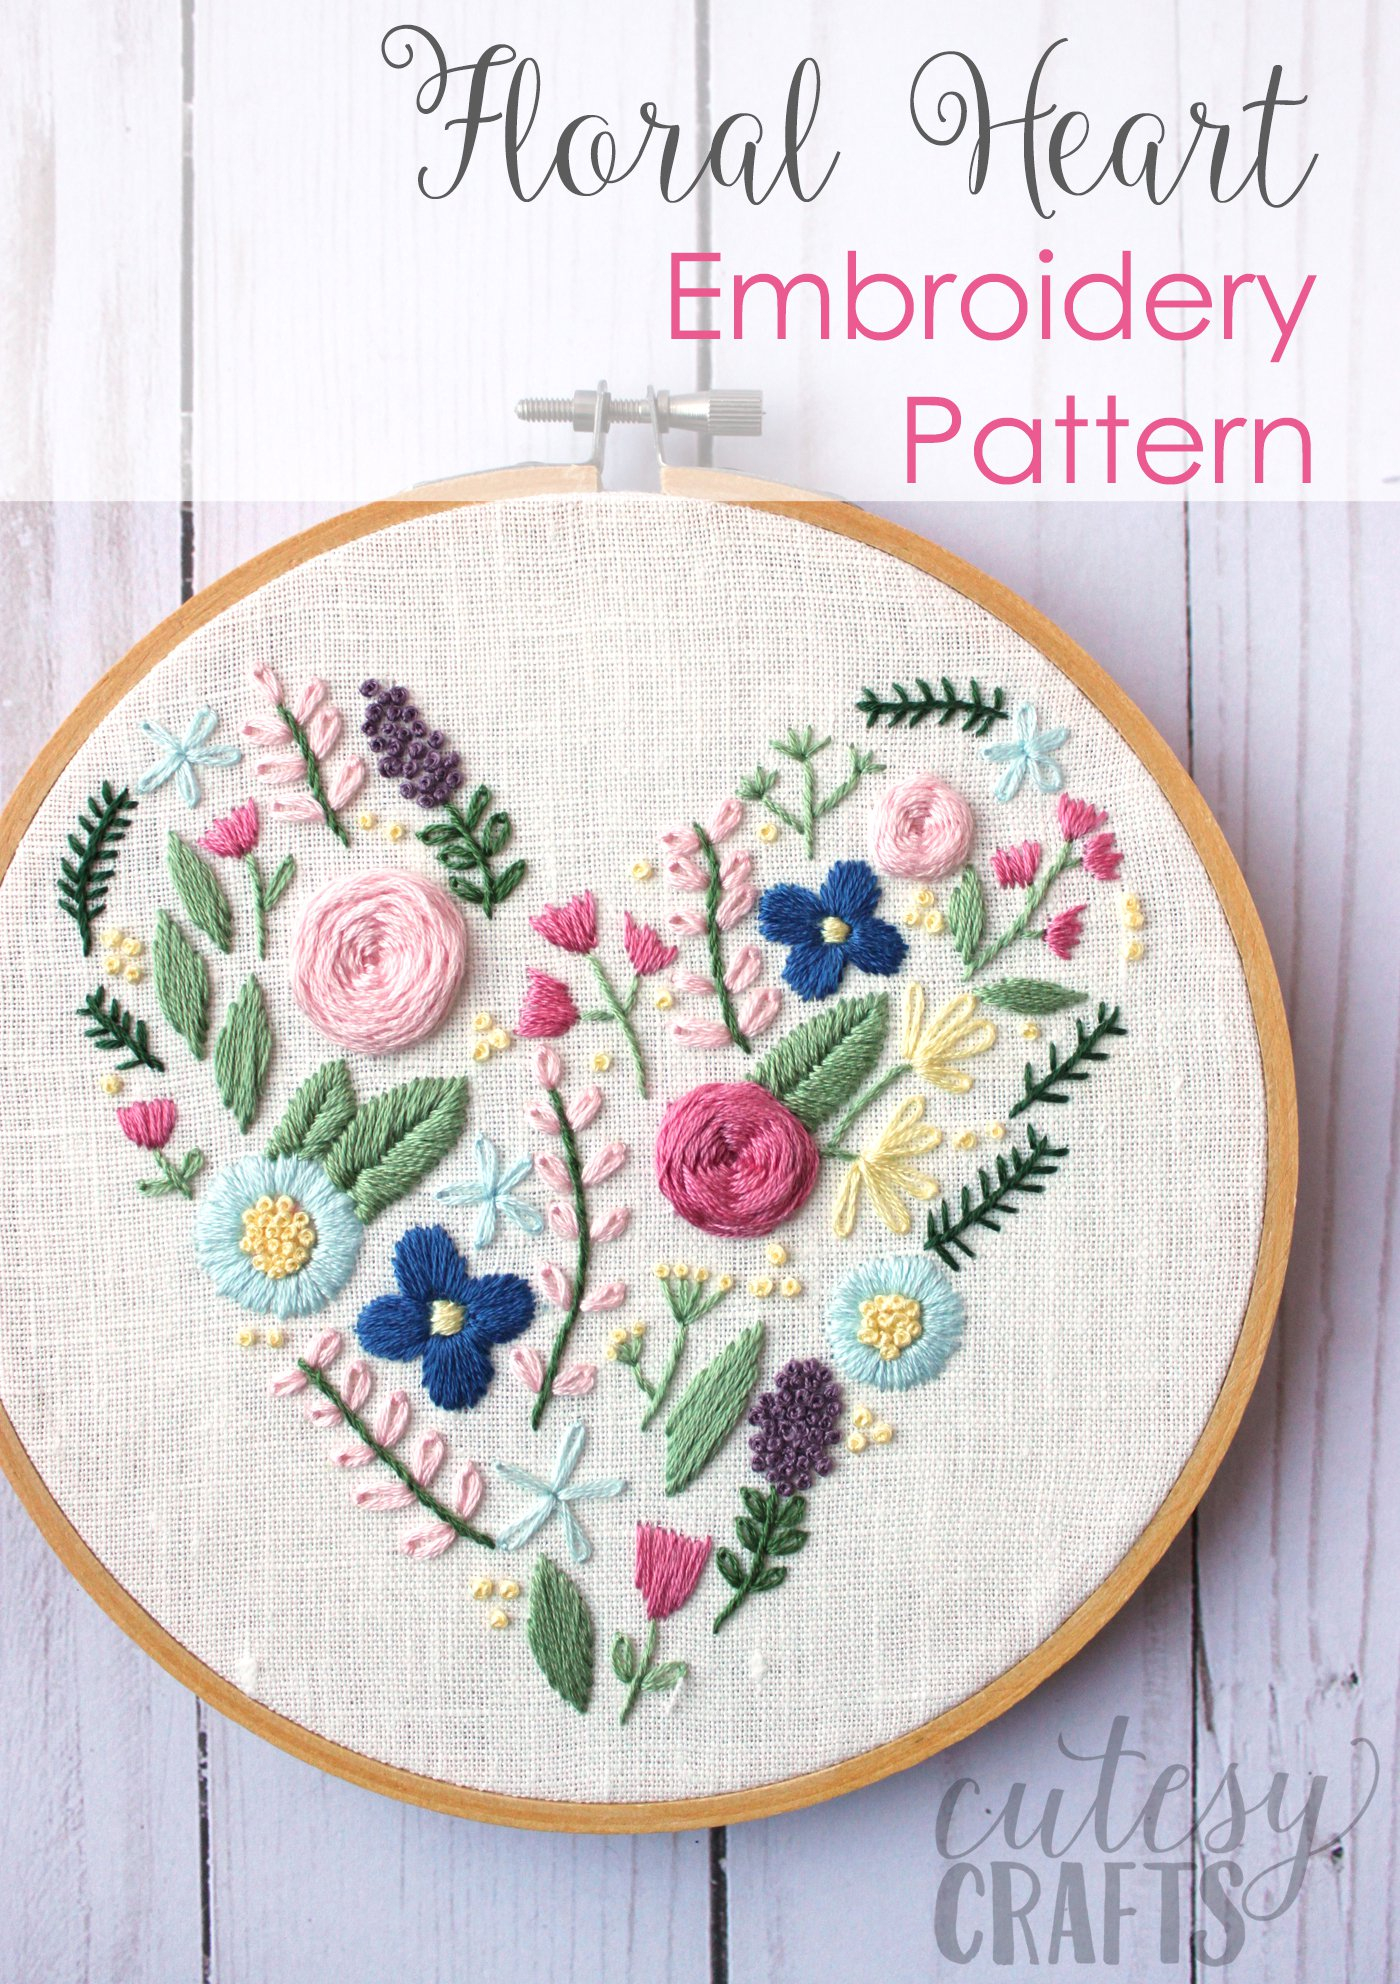 Embroidery Stitch Patterns Floral Heart Hand Embroidery Pattern The Polka Dot Chair